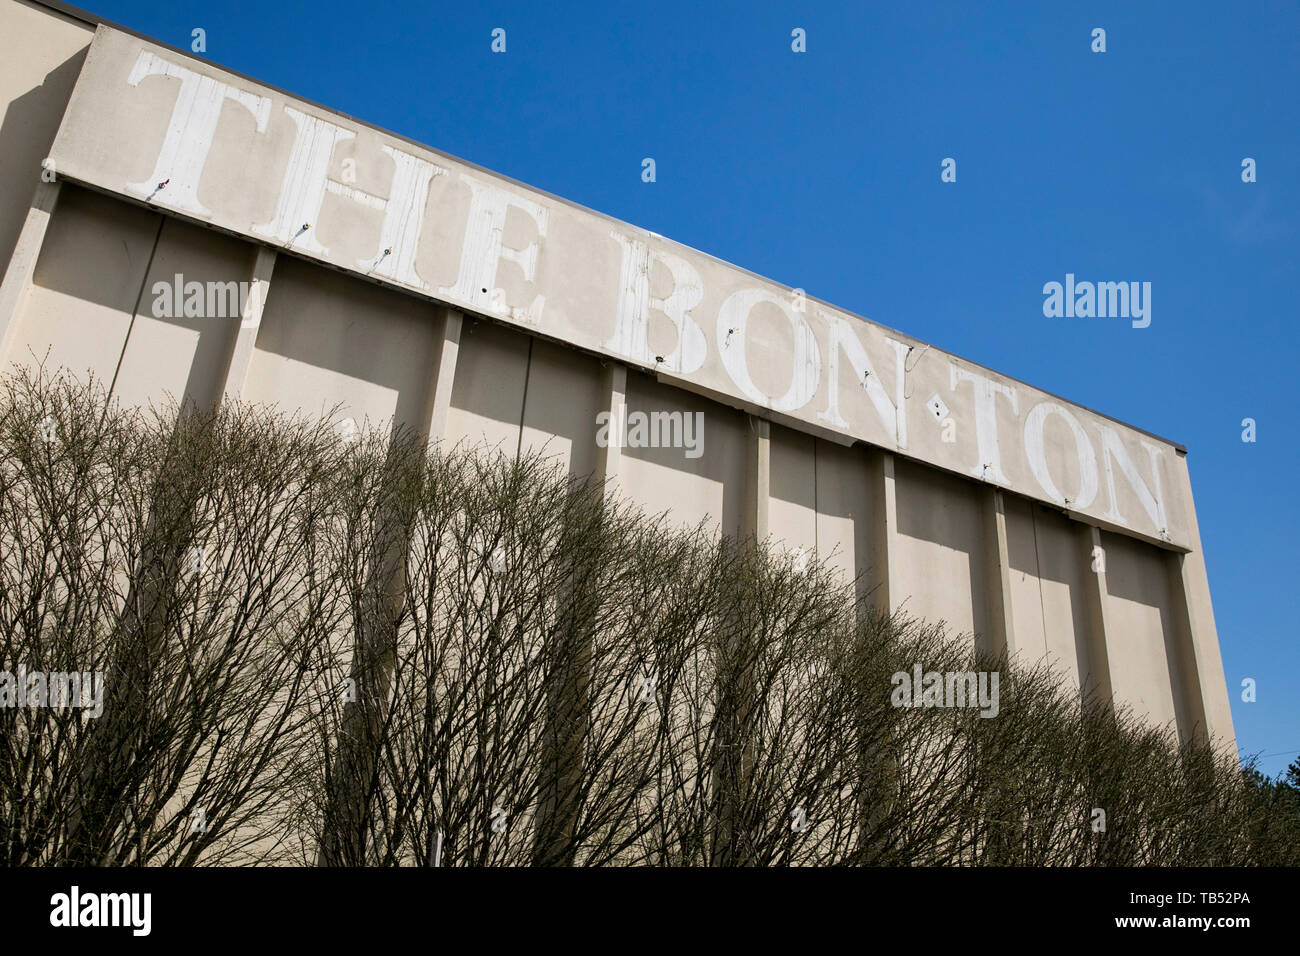 The outline of a The Bon-Ton logo sign outside of a closed retail store location in Queensbury, New York, on April 23, 2019. Stock Photo